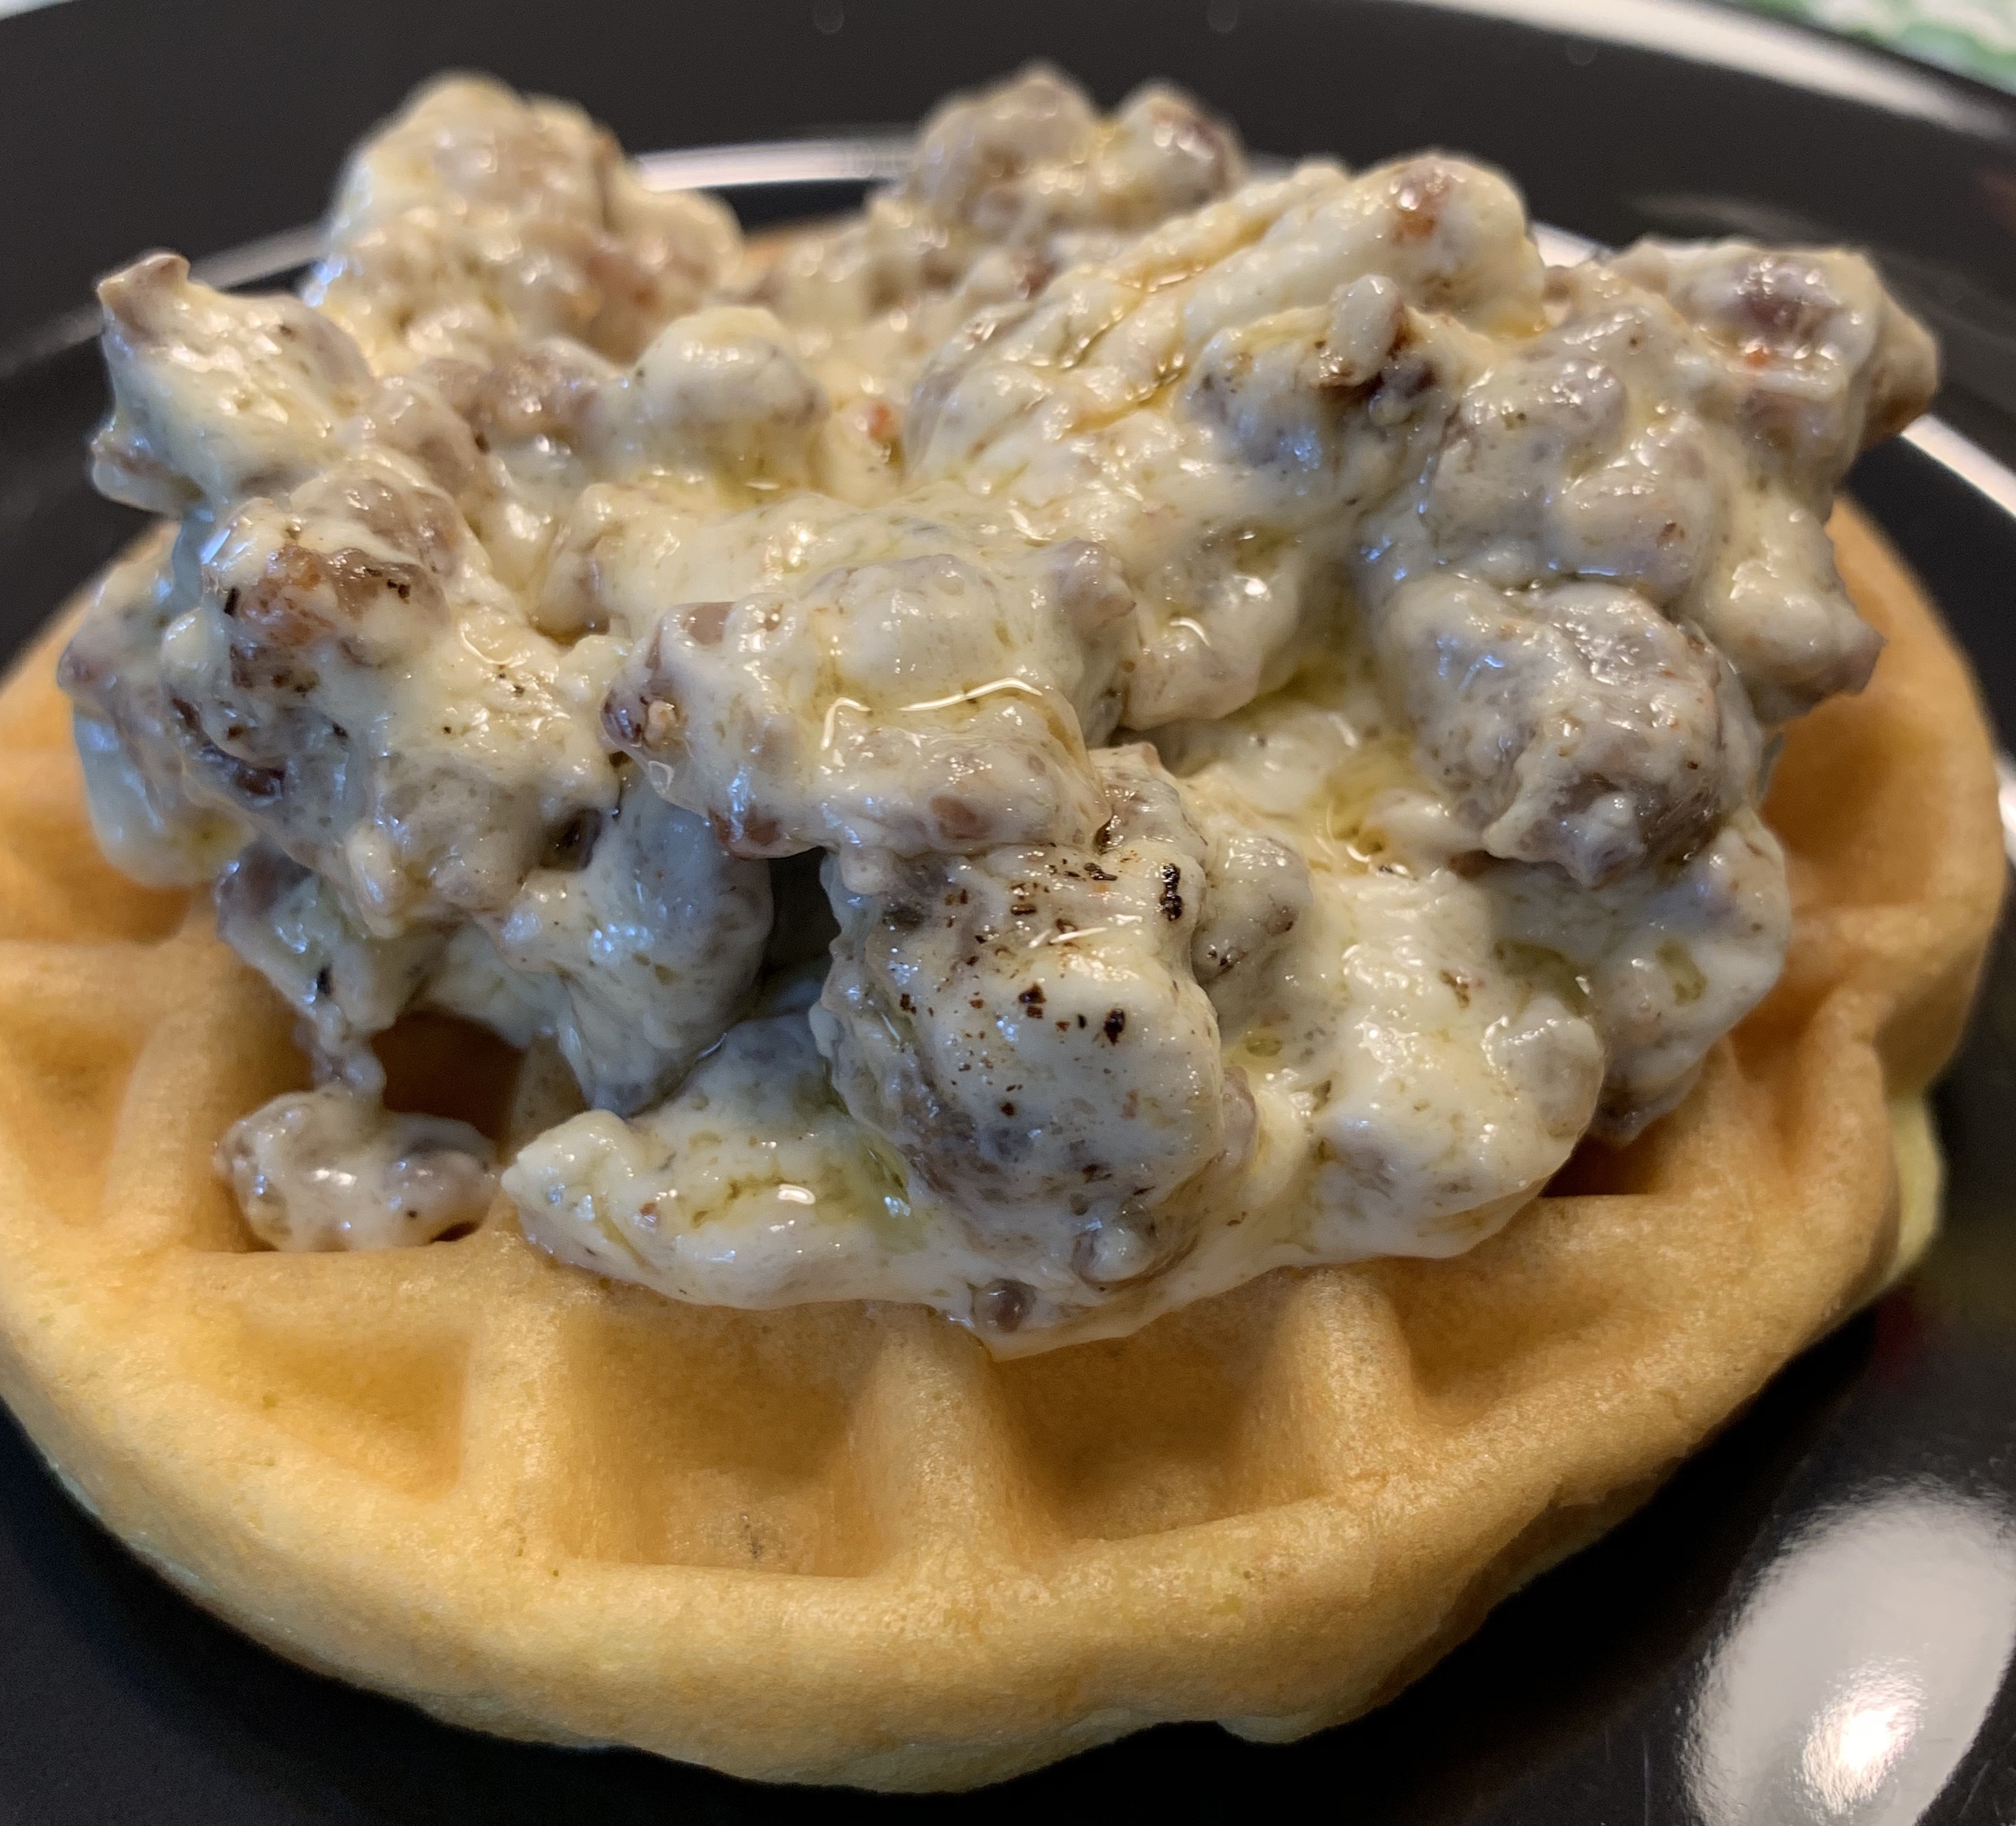 Chaffle Biscuits and Sausage Gravy